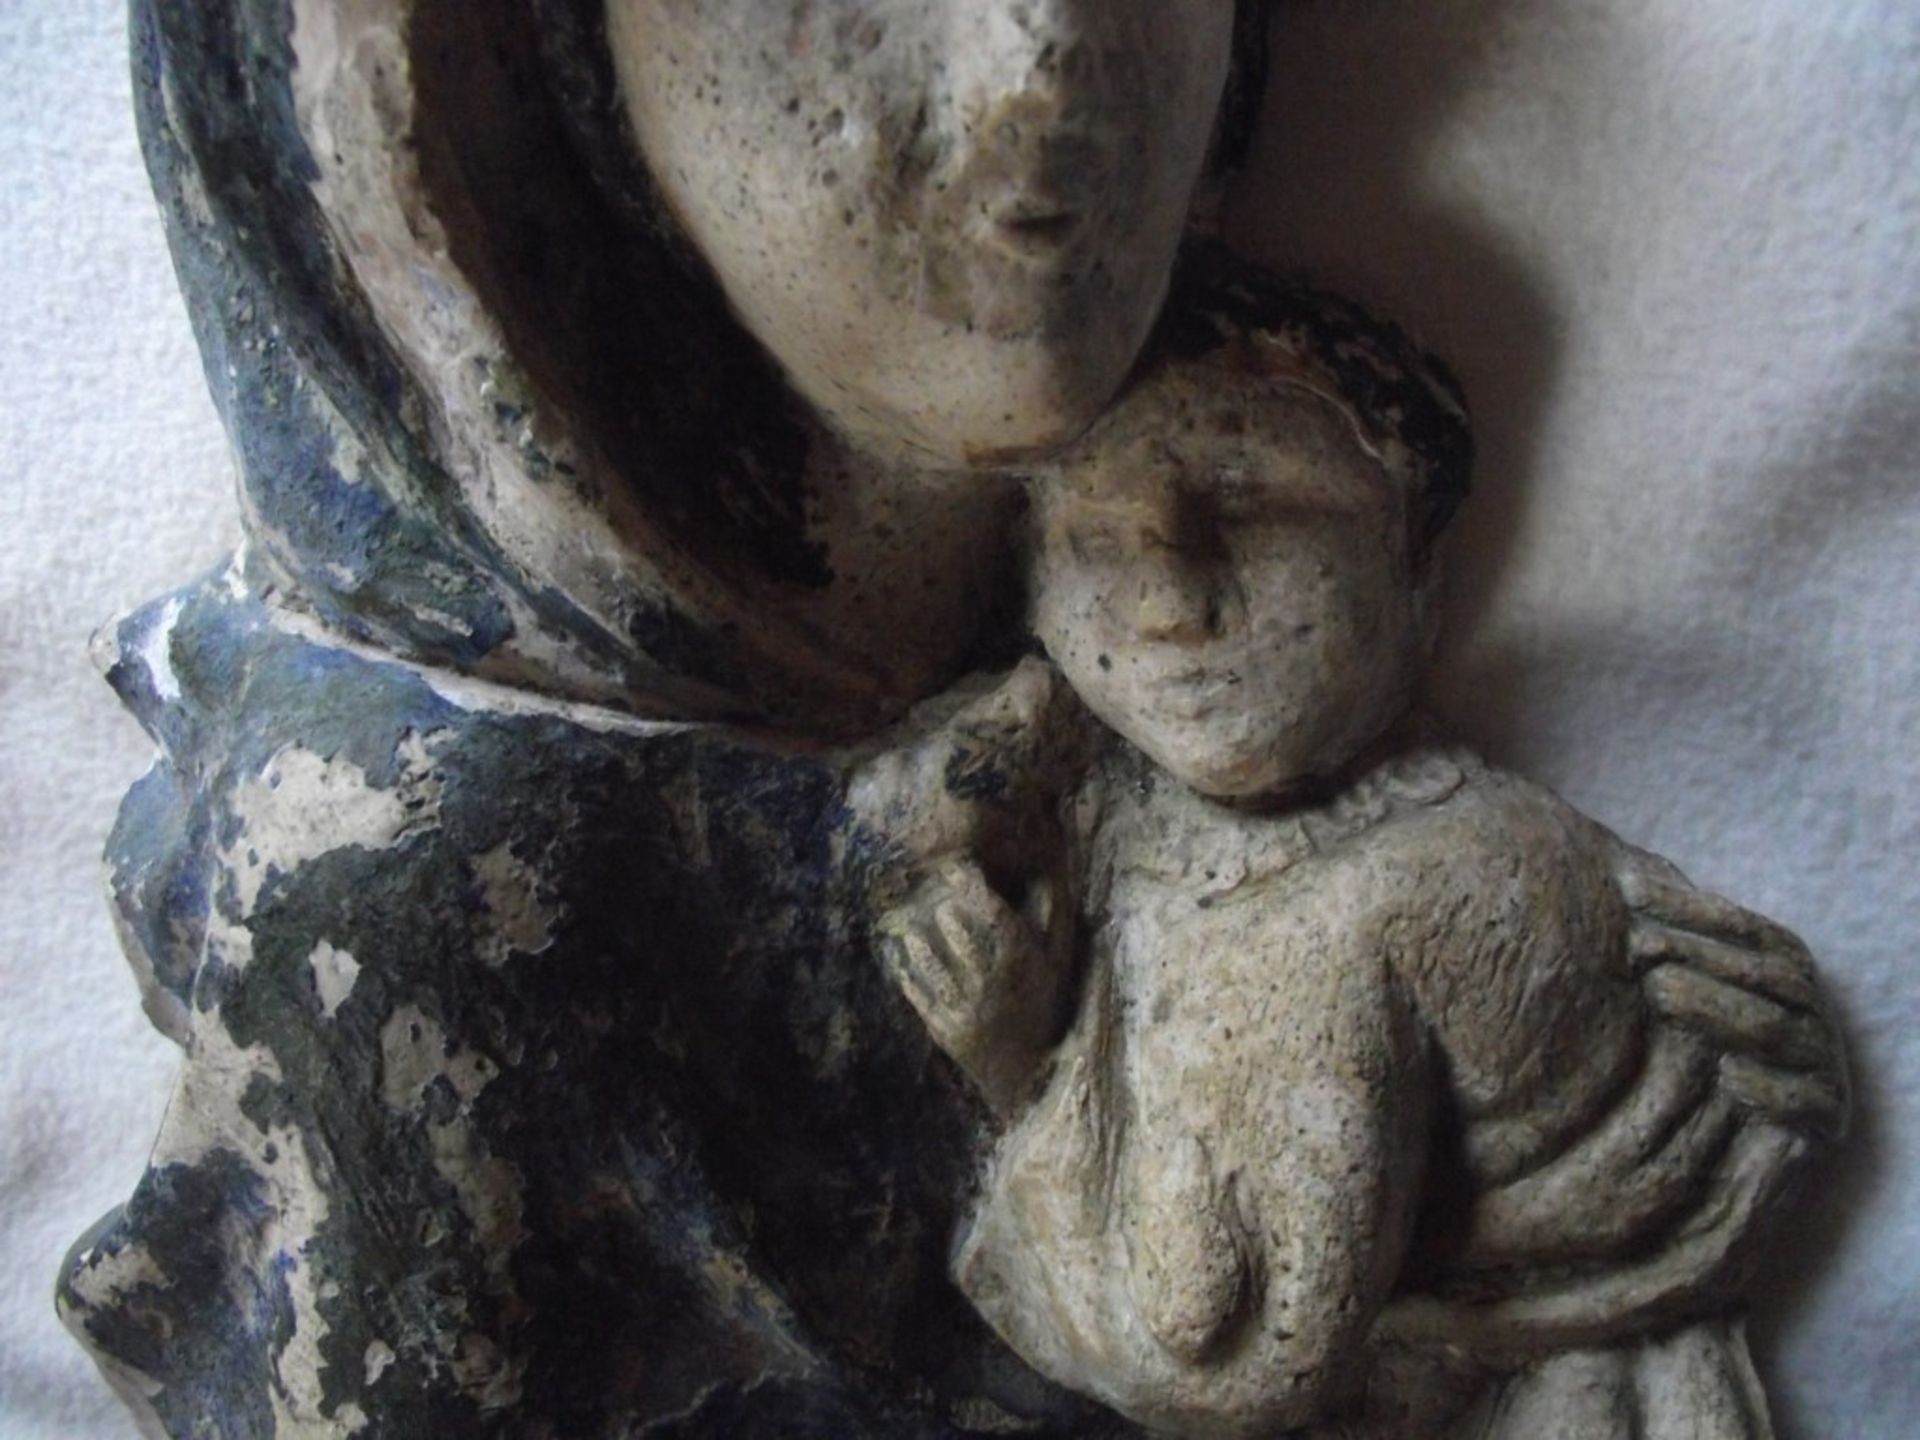 Antique Madonna & Child Wall Hanging Figure - 11 3/4"" High. - Image 19 of 21